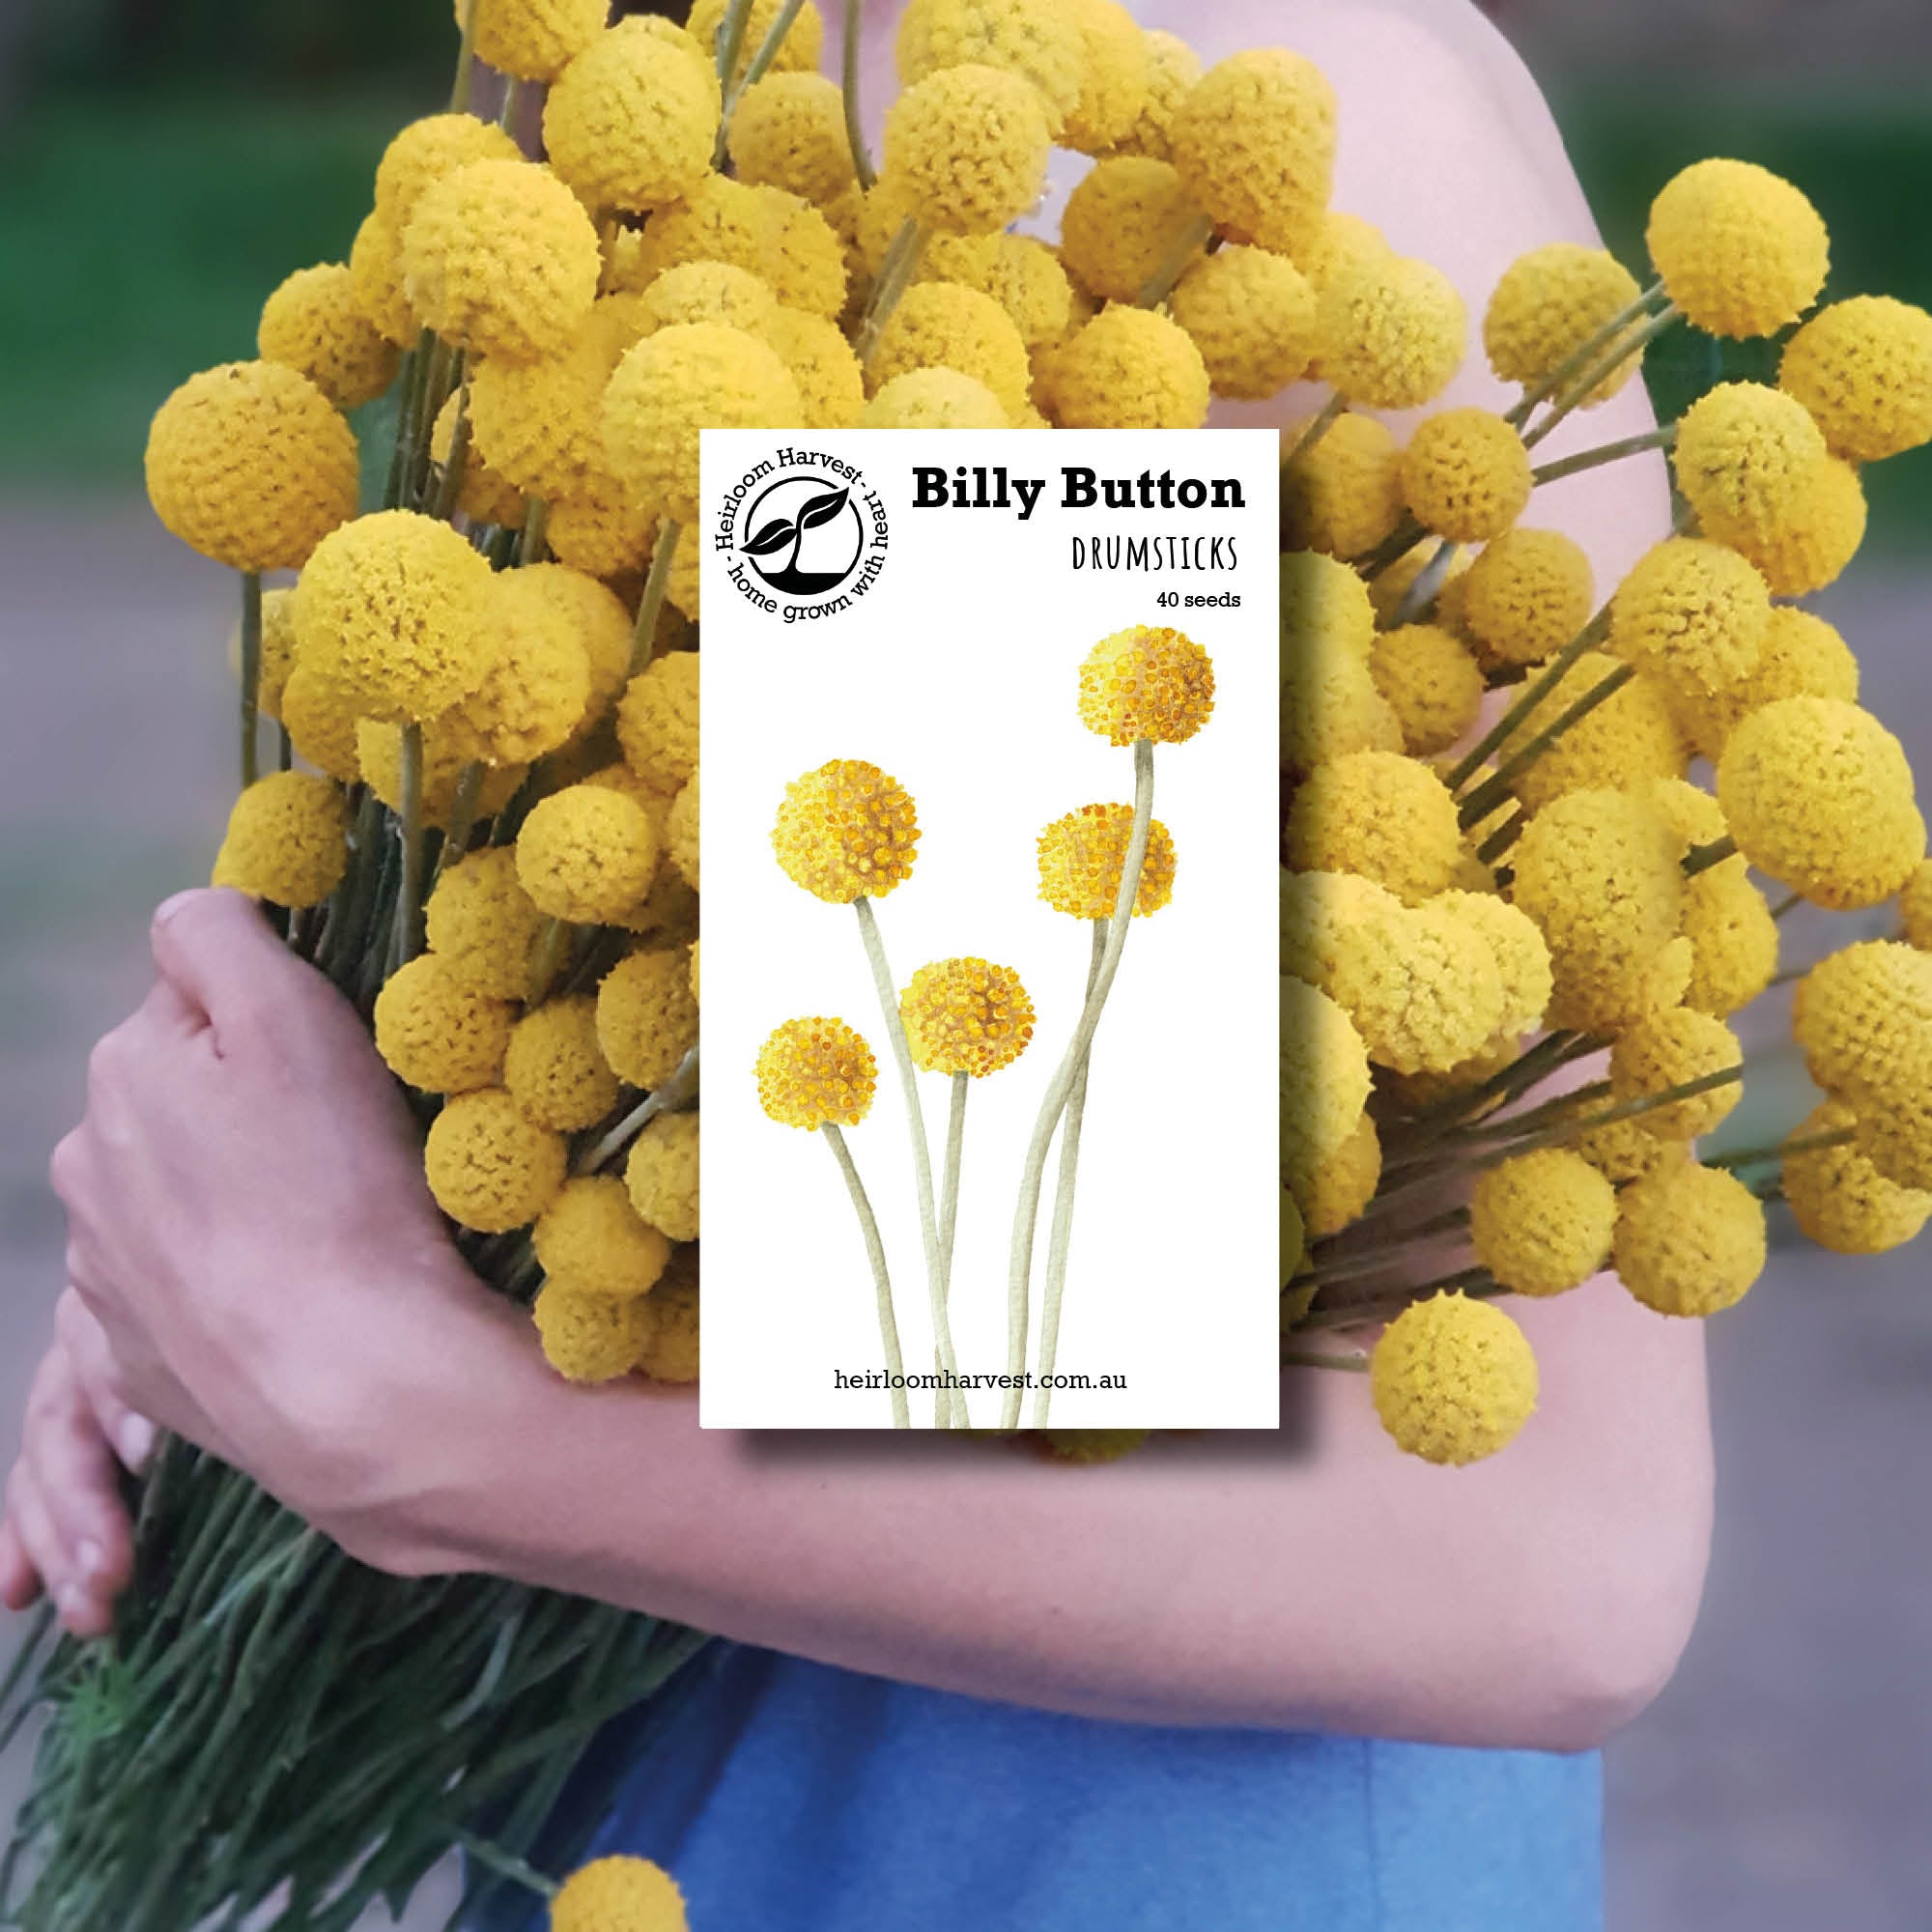 Billy Button Organic flower seeds made by Heirloom Harvest in Australia from Your Wild Books